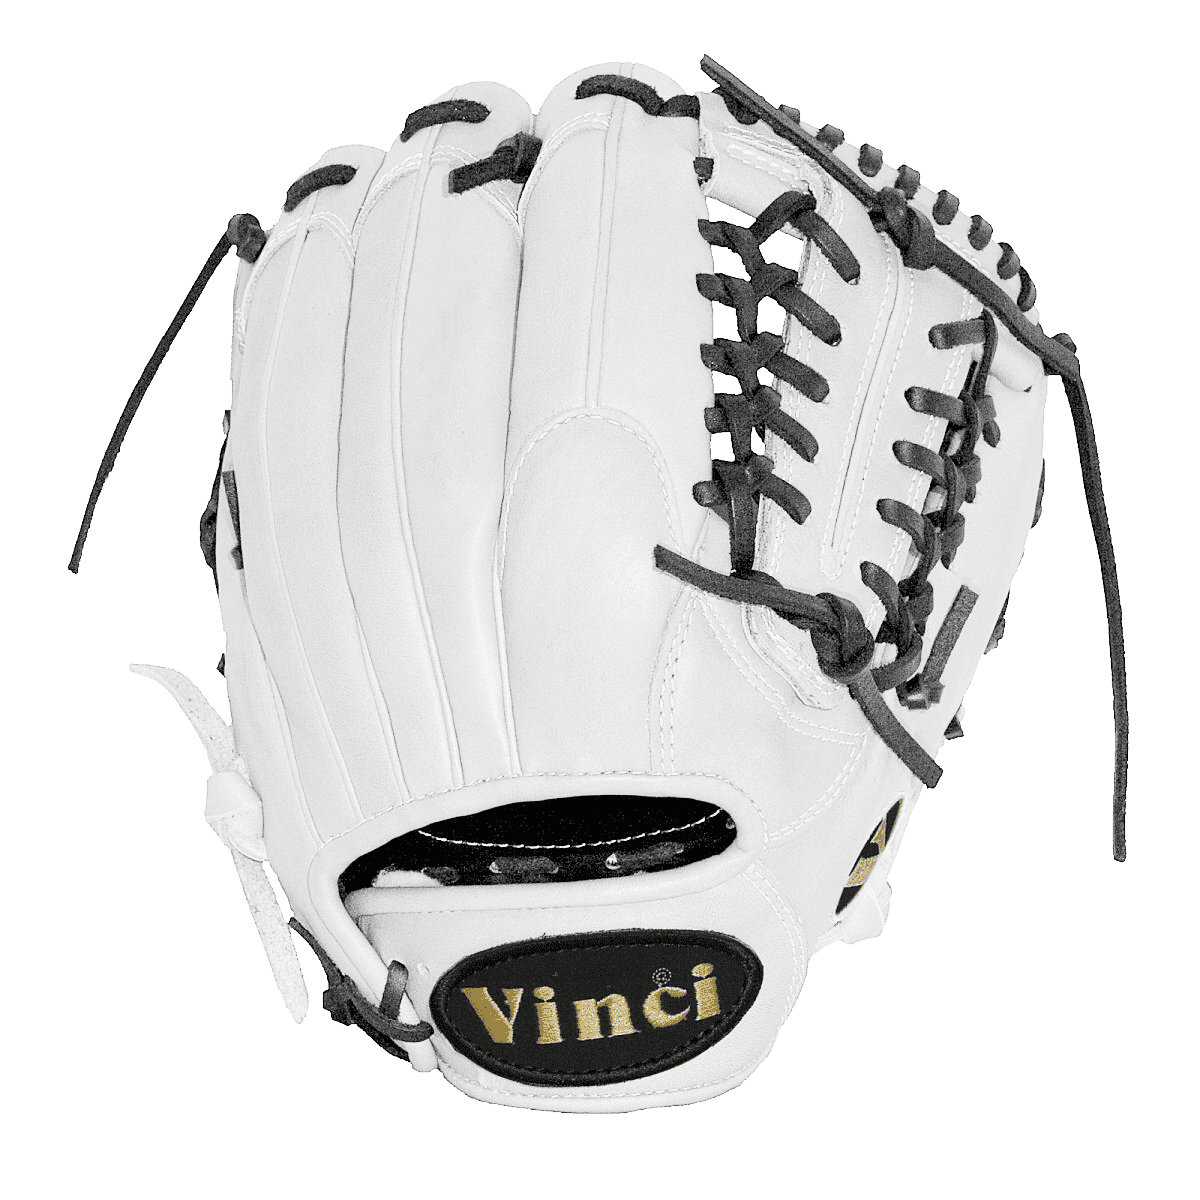 Build Your Own Here Now-See Your Colors-Baseball/Softball Fielders Glove  Limited Series -Now Extra Bonus-FREE NAME